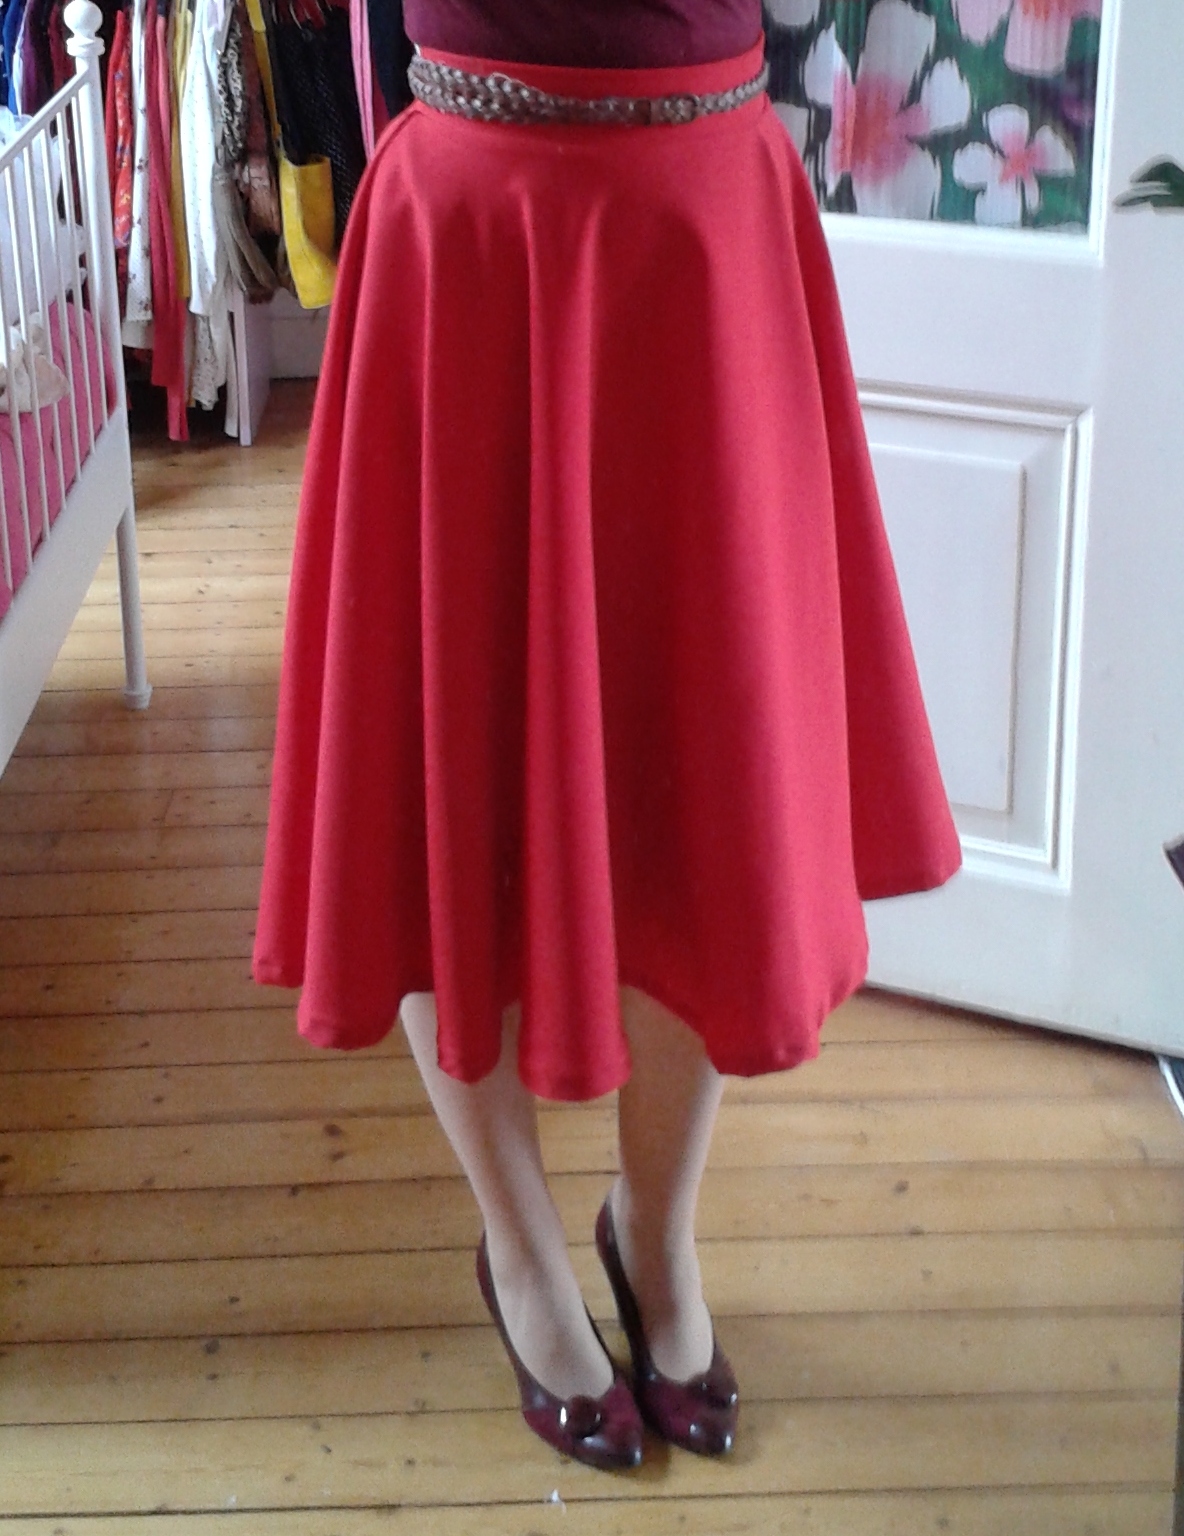 40's & 50's fashionista: Vintage sewing: circle skirts